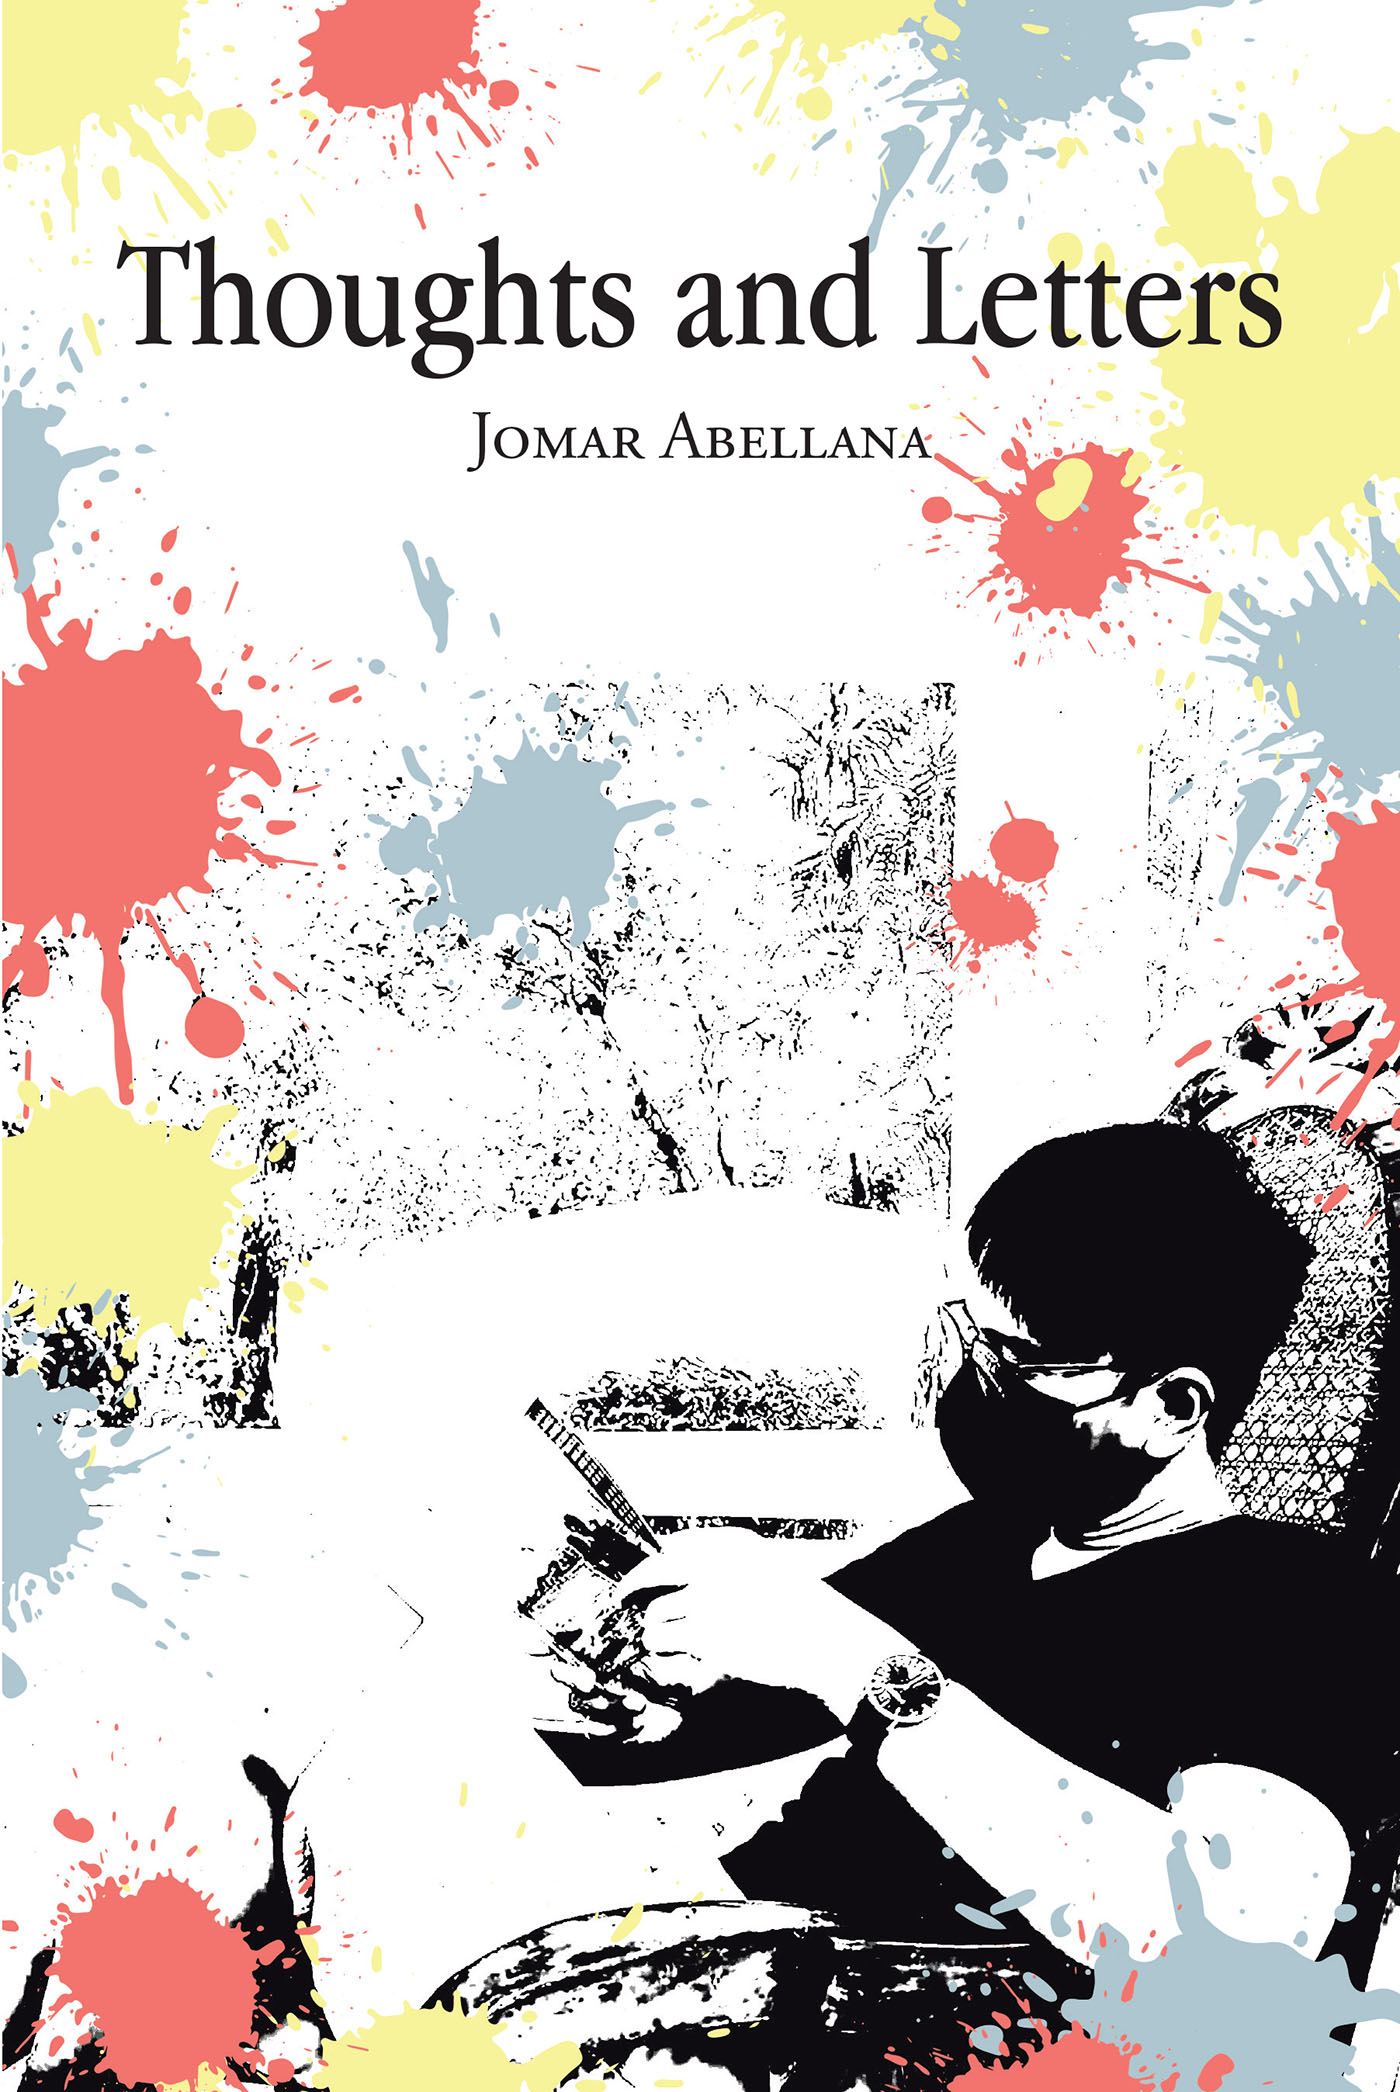 Jomar Abellana’s Newly Released "Thoughts and Letters" is an Impactful Exploration of the Human Experience